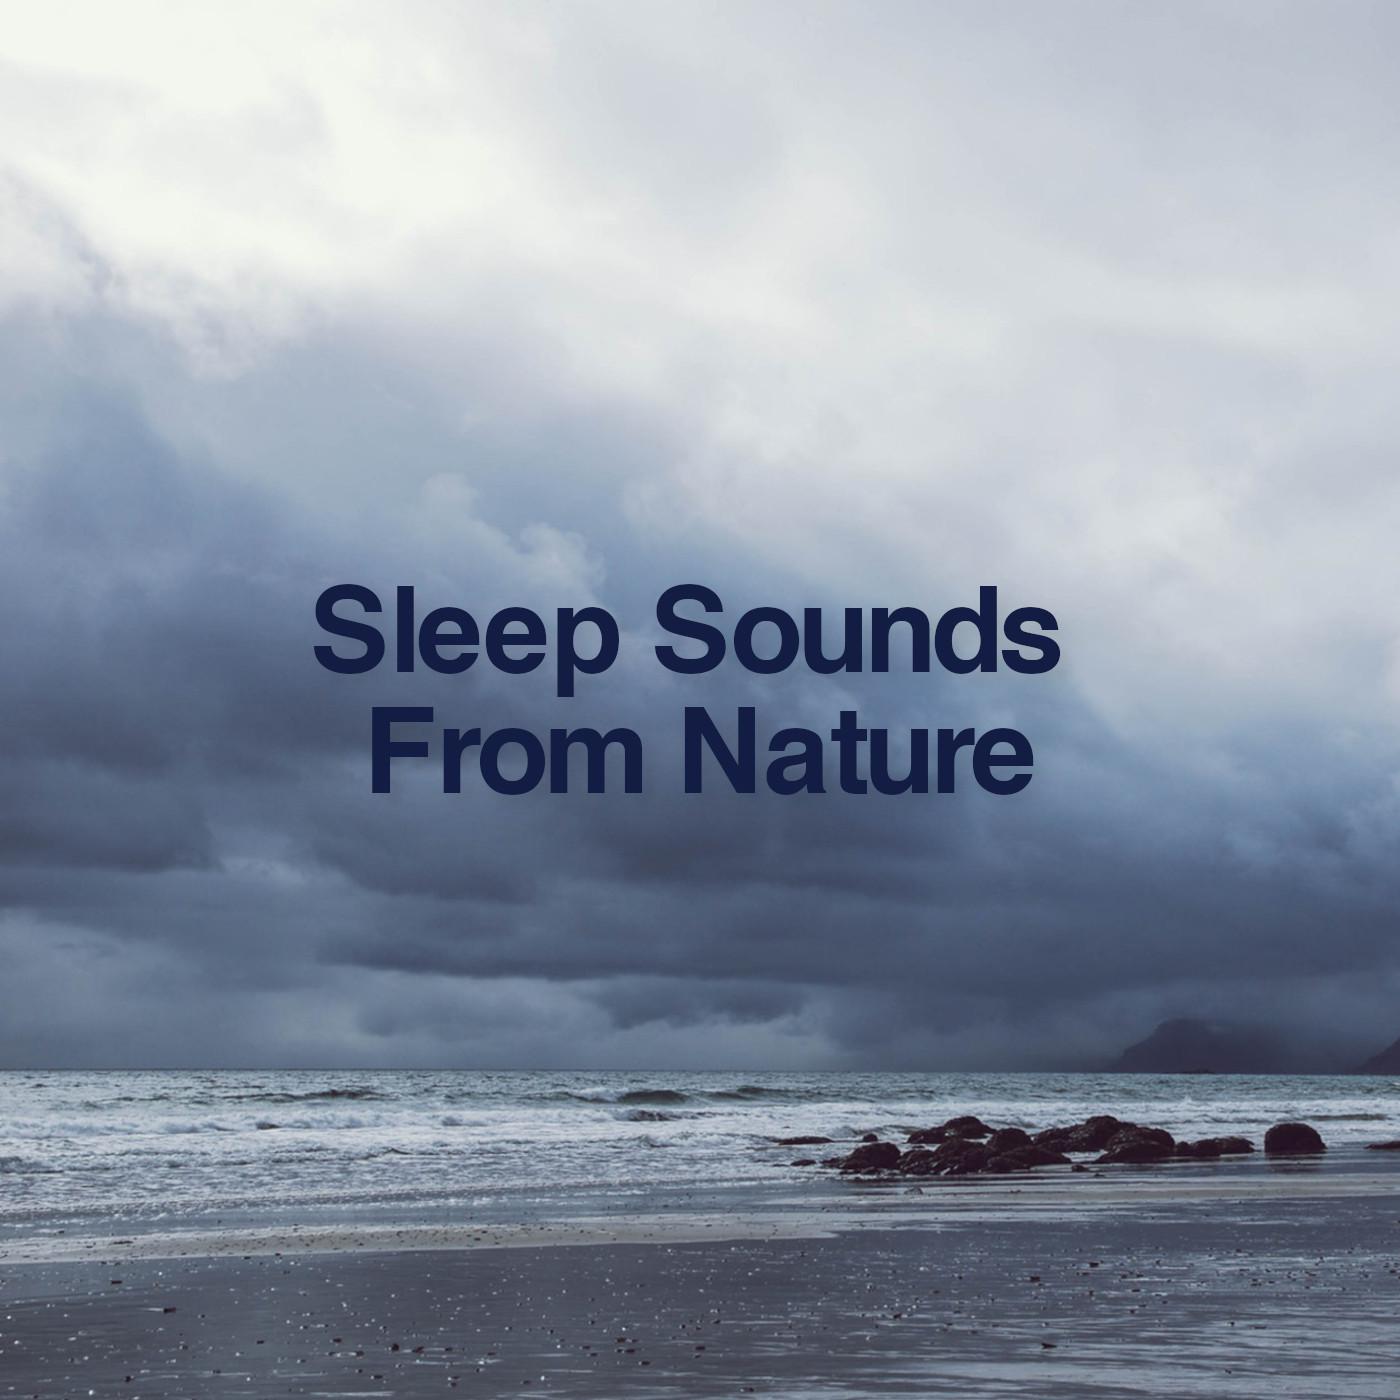 Sleep Sounds By Nature